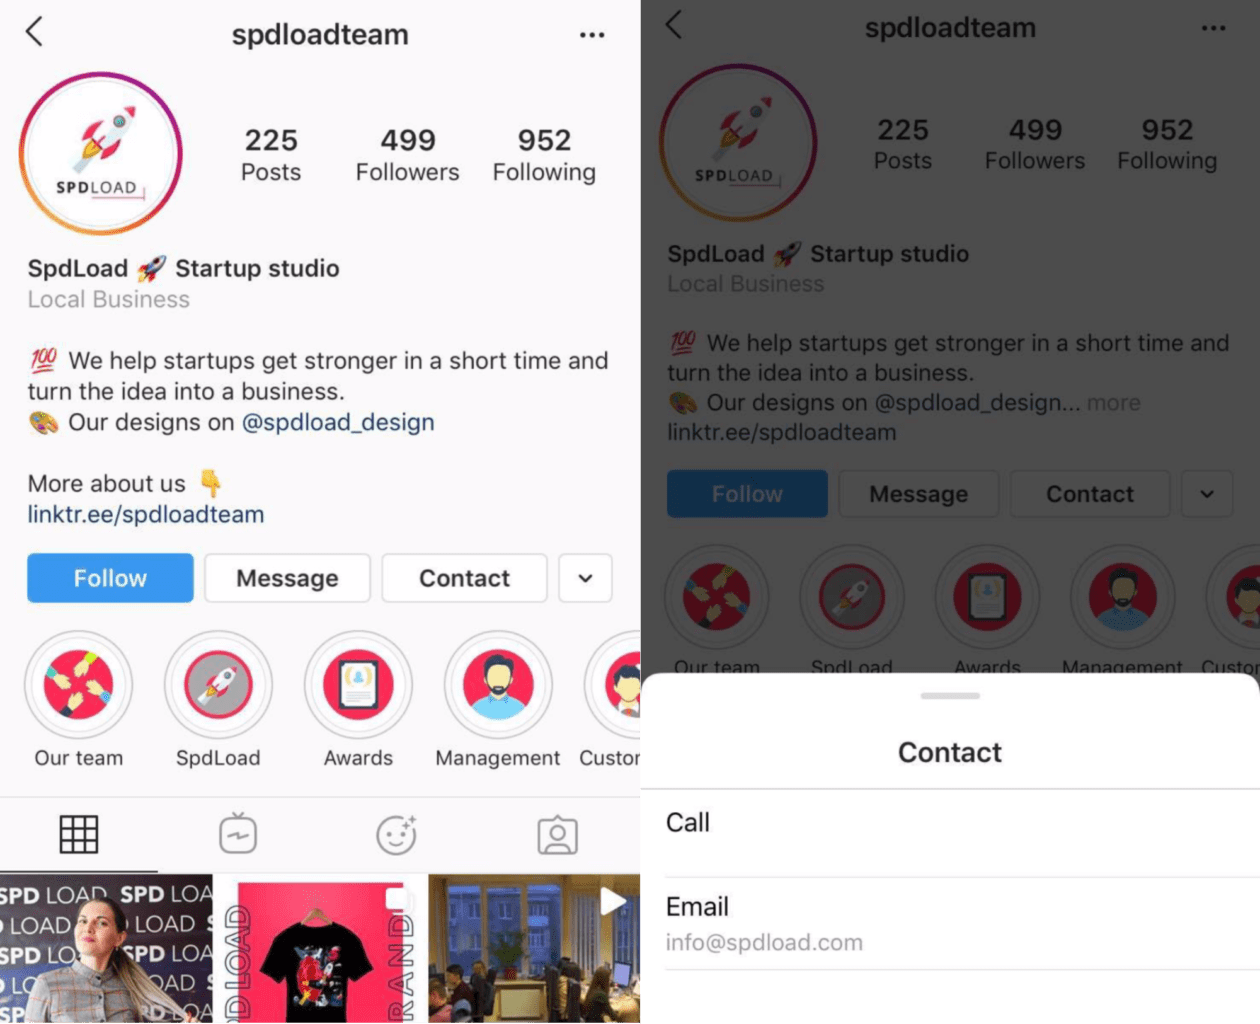 screenshots showing the contact methods on the SPDload Instagram page